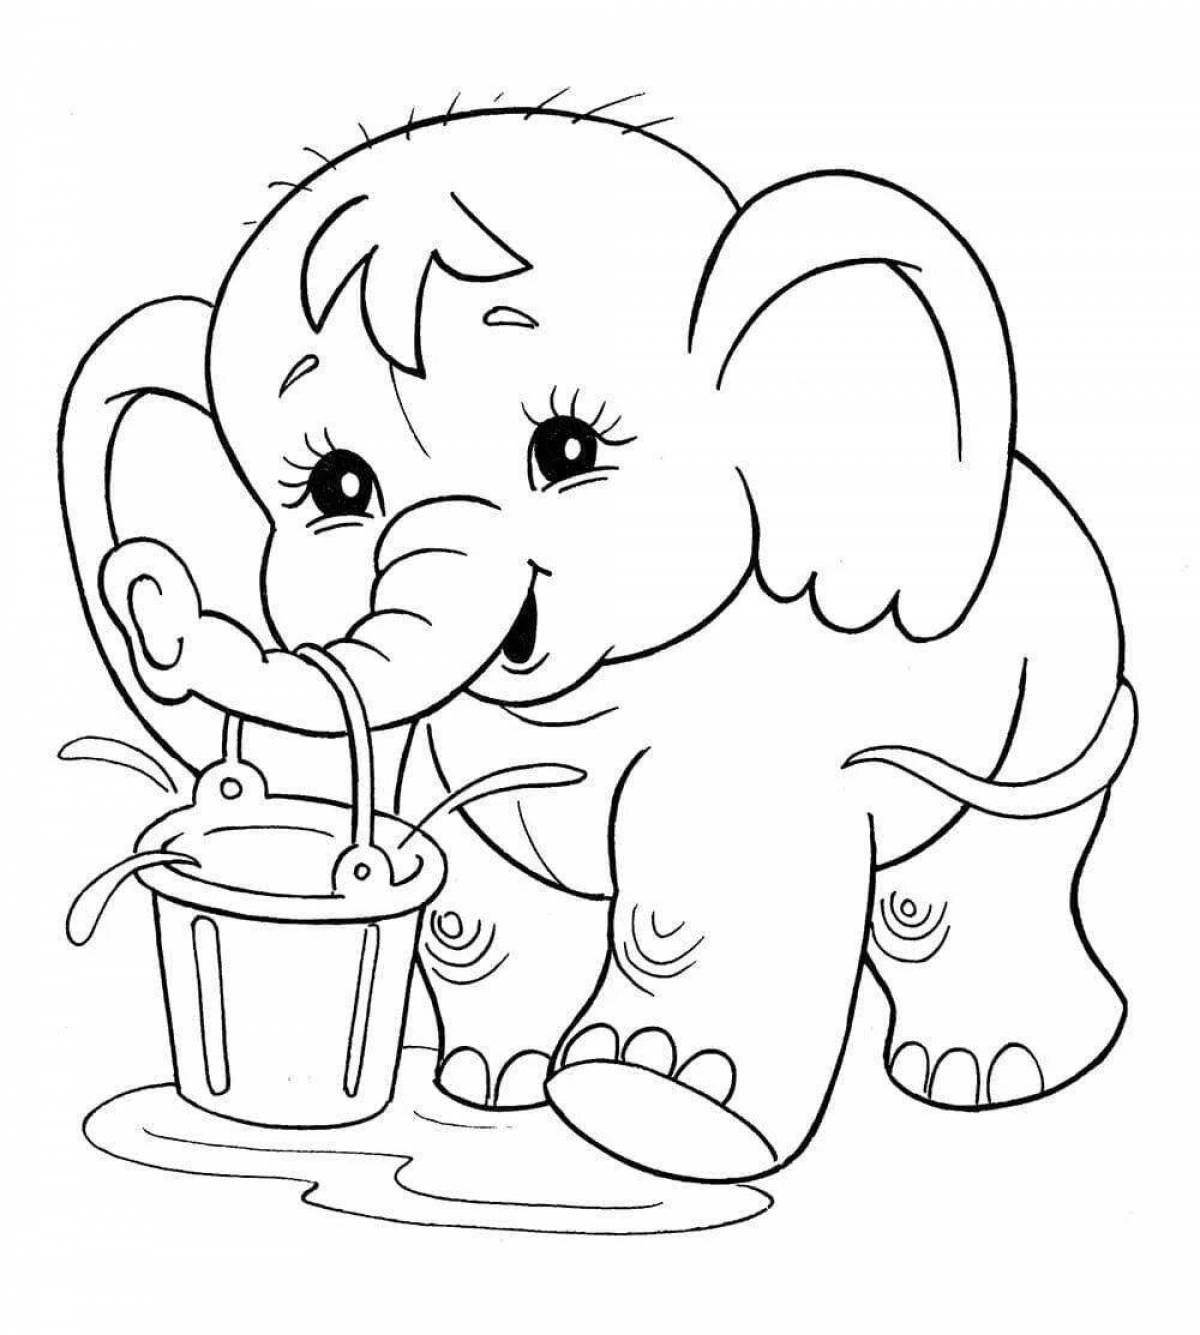 Cute elephant coloring pages for 3-4 year olds